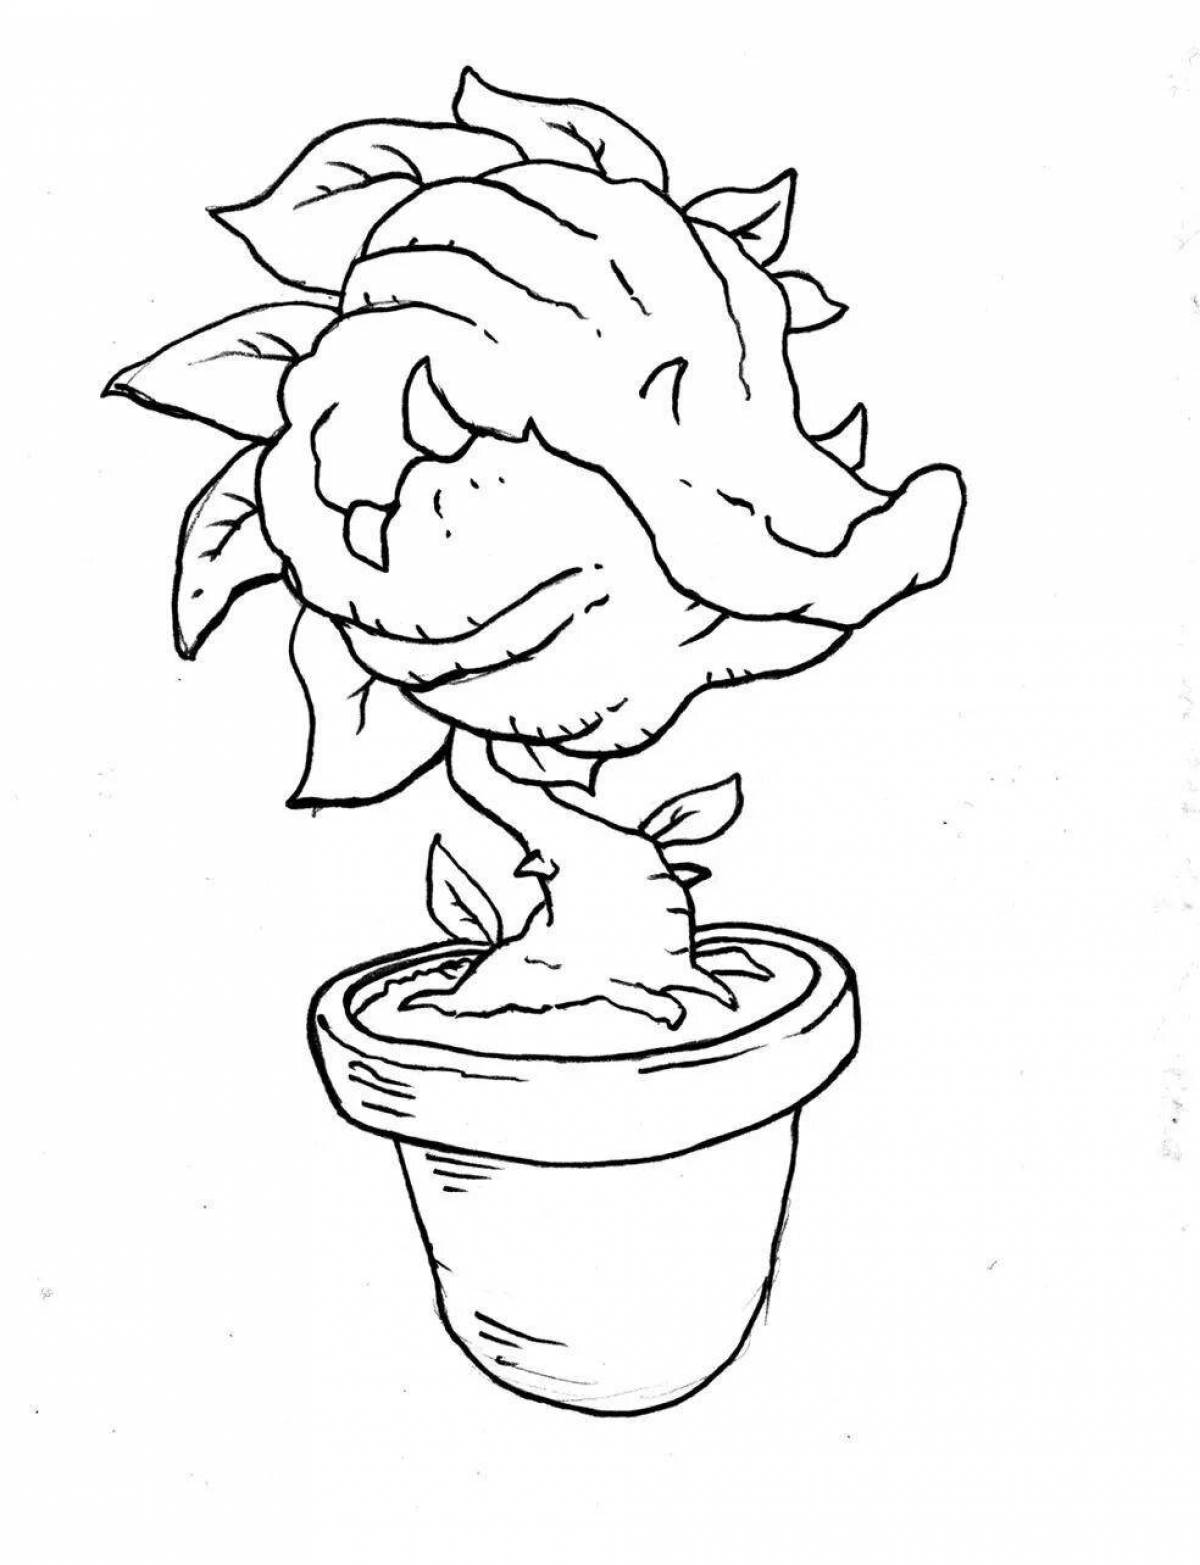 Intriguing carnivorous plants coloring page